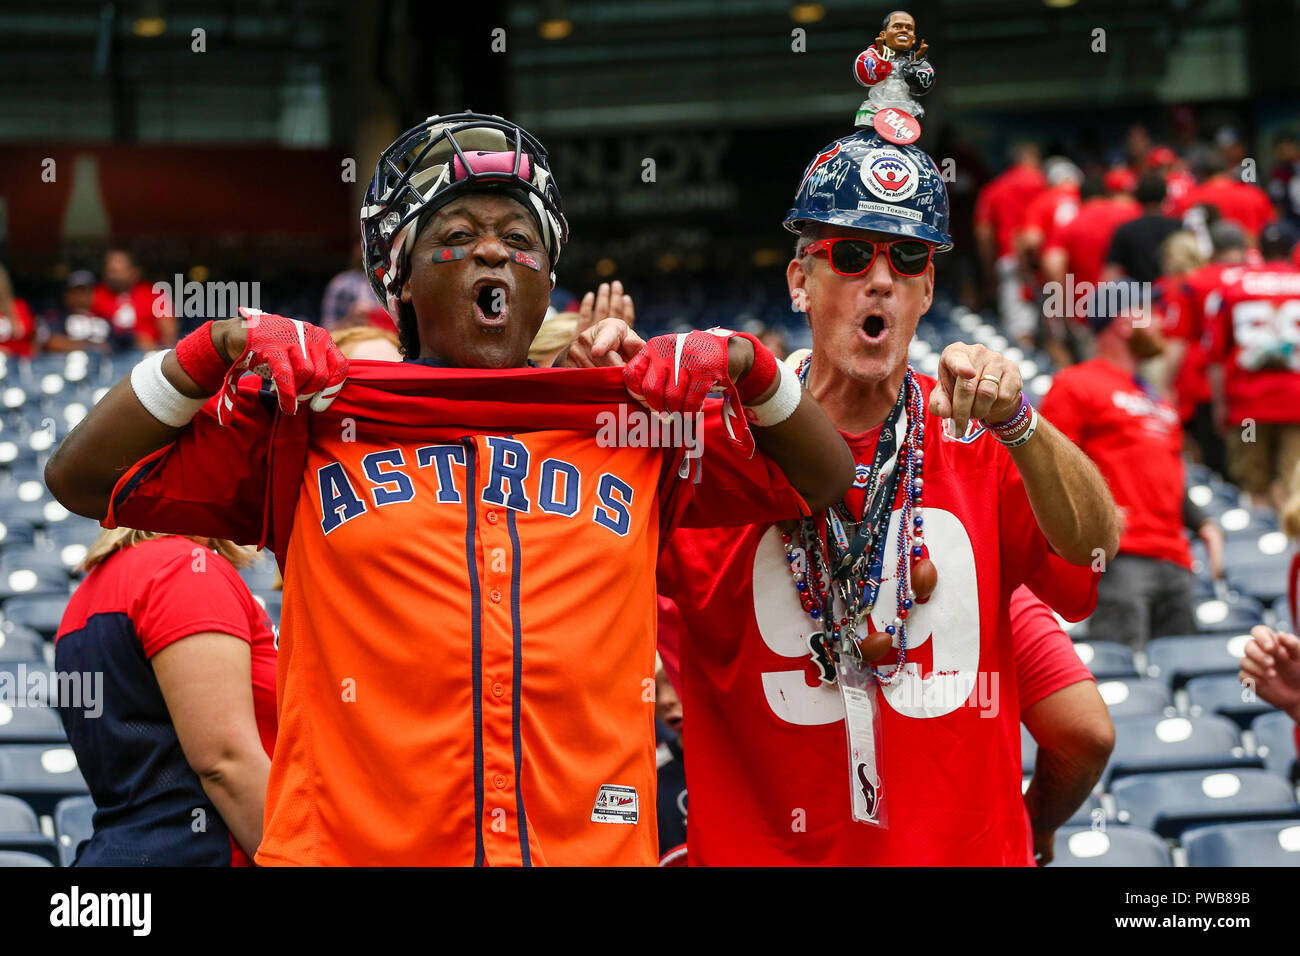 Houston, TX, USA. 14th Oct, 2018. Houston Texans fans celebrate by showing  their Houston Astros jersey after the Texans win over the Buffalo Bills at  NRG Stadium in Houston, TX. John Glaser/CSM/Alamy